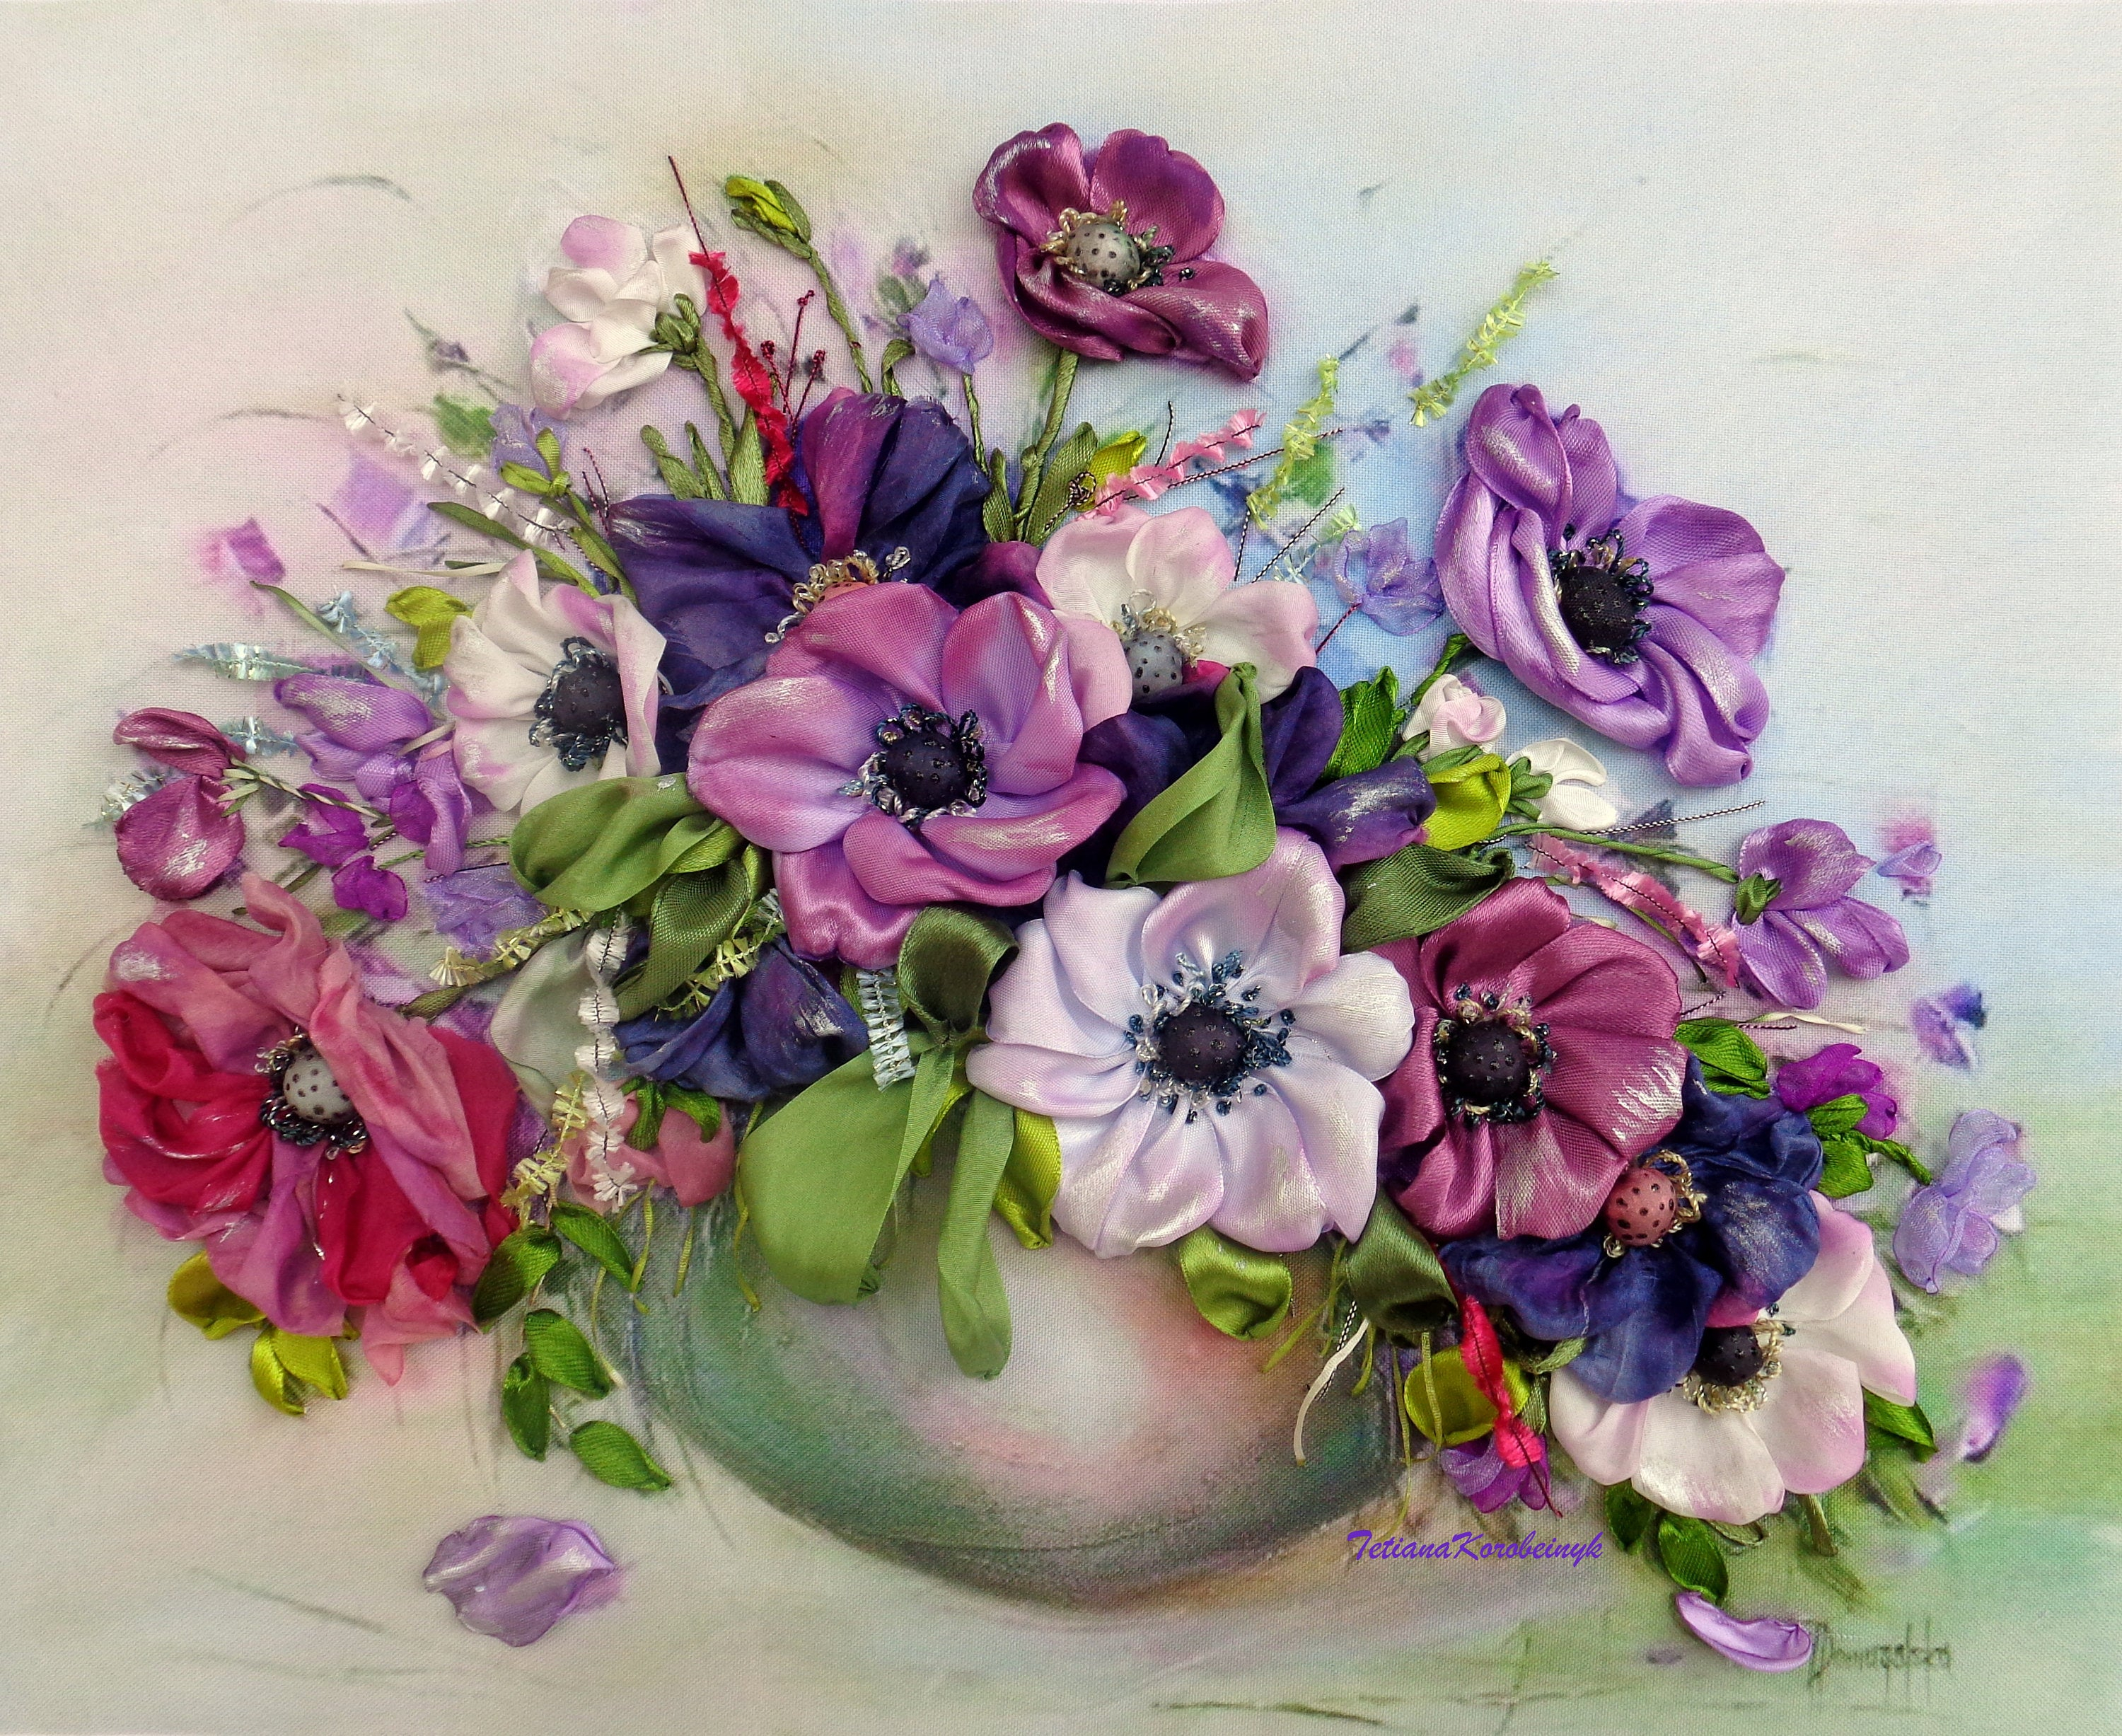 Ribbon Embroidery Flowers Patterns Anemones Silk Ribbon Embroidery Pattern Purple White Pink Ribbon Embroidered Picture Ribbon Painting Ribbon Work 3d Embroidered Flower